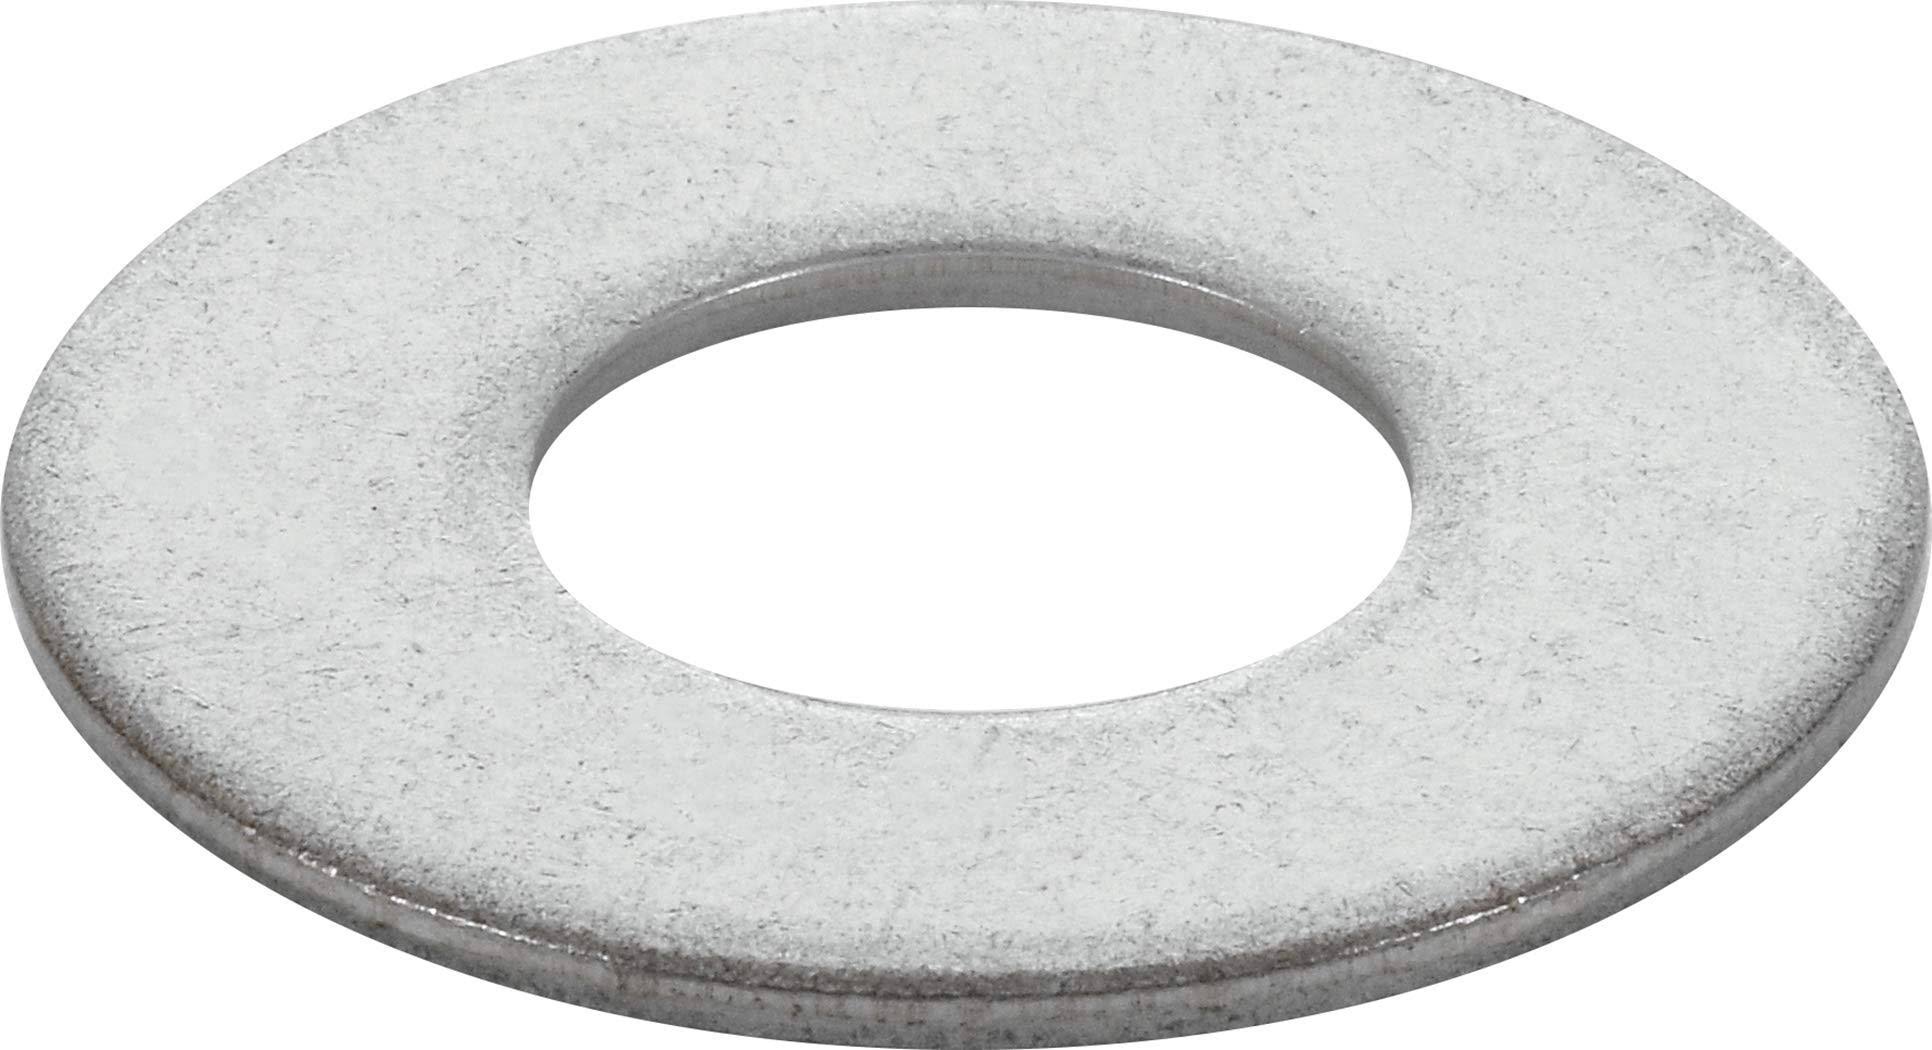 The Hillman Group M6 Metric Stainless Steel Fender Washer - 12pk